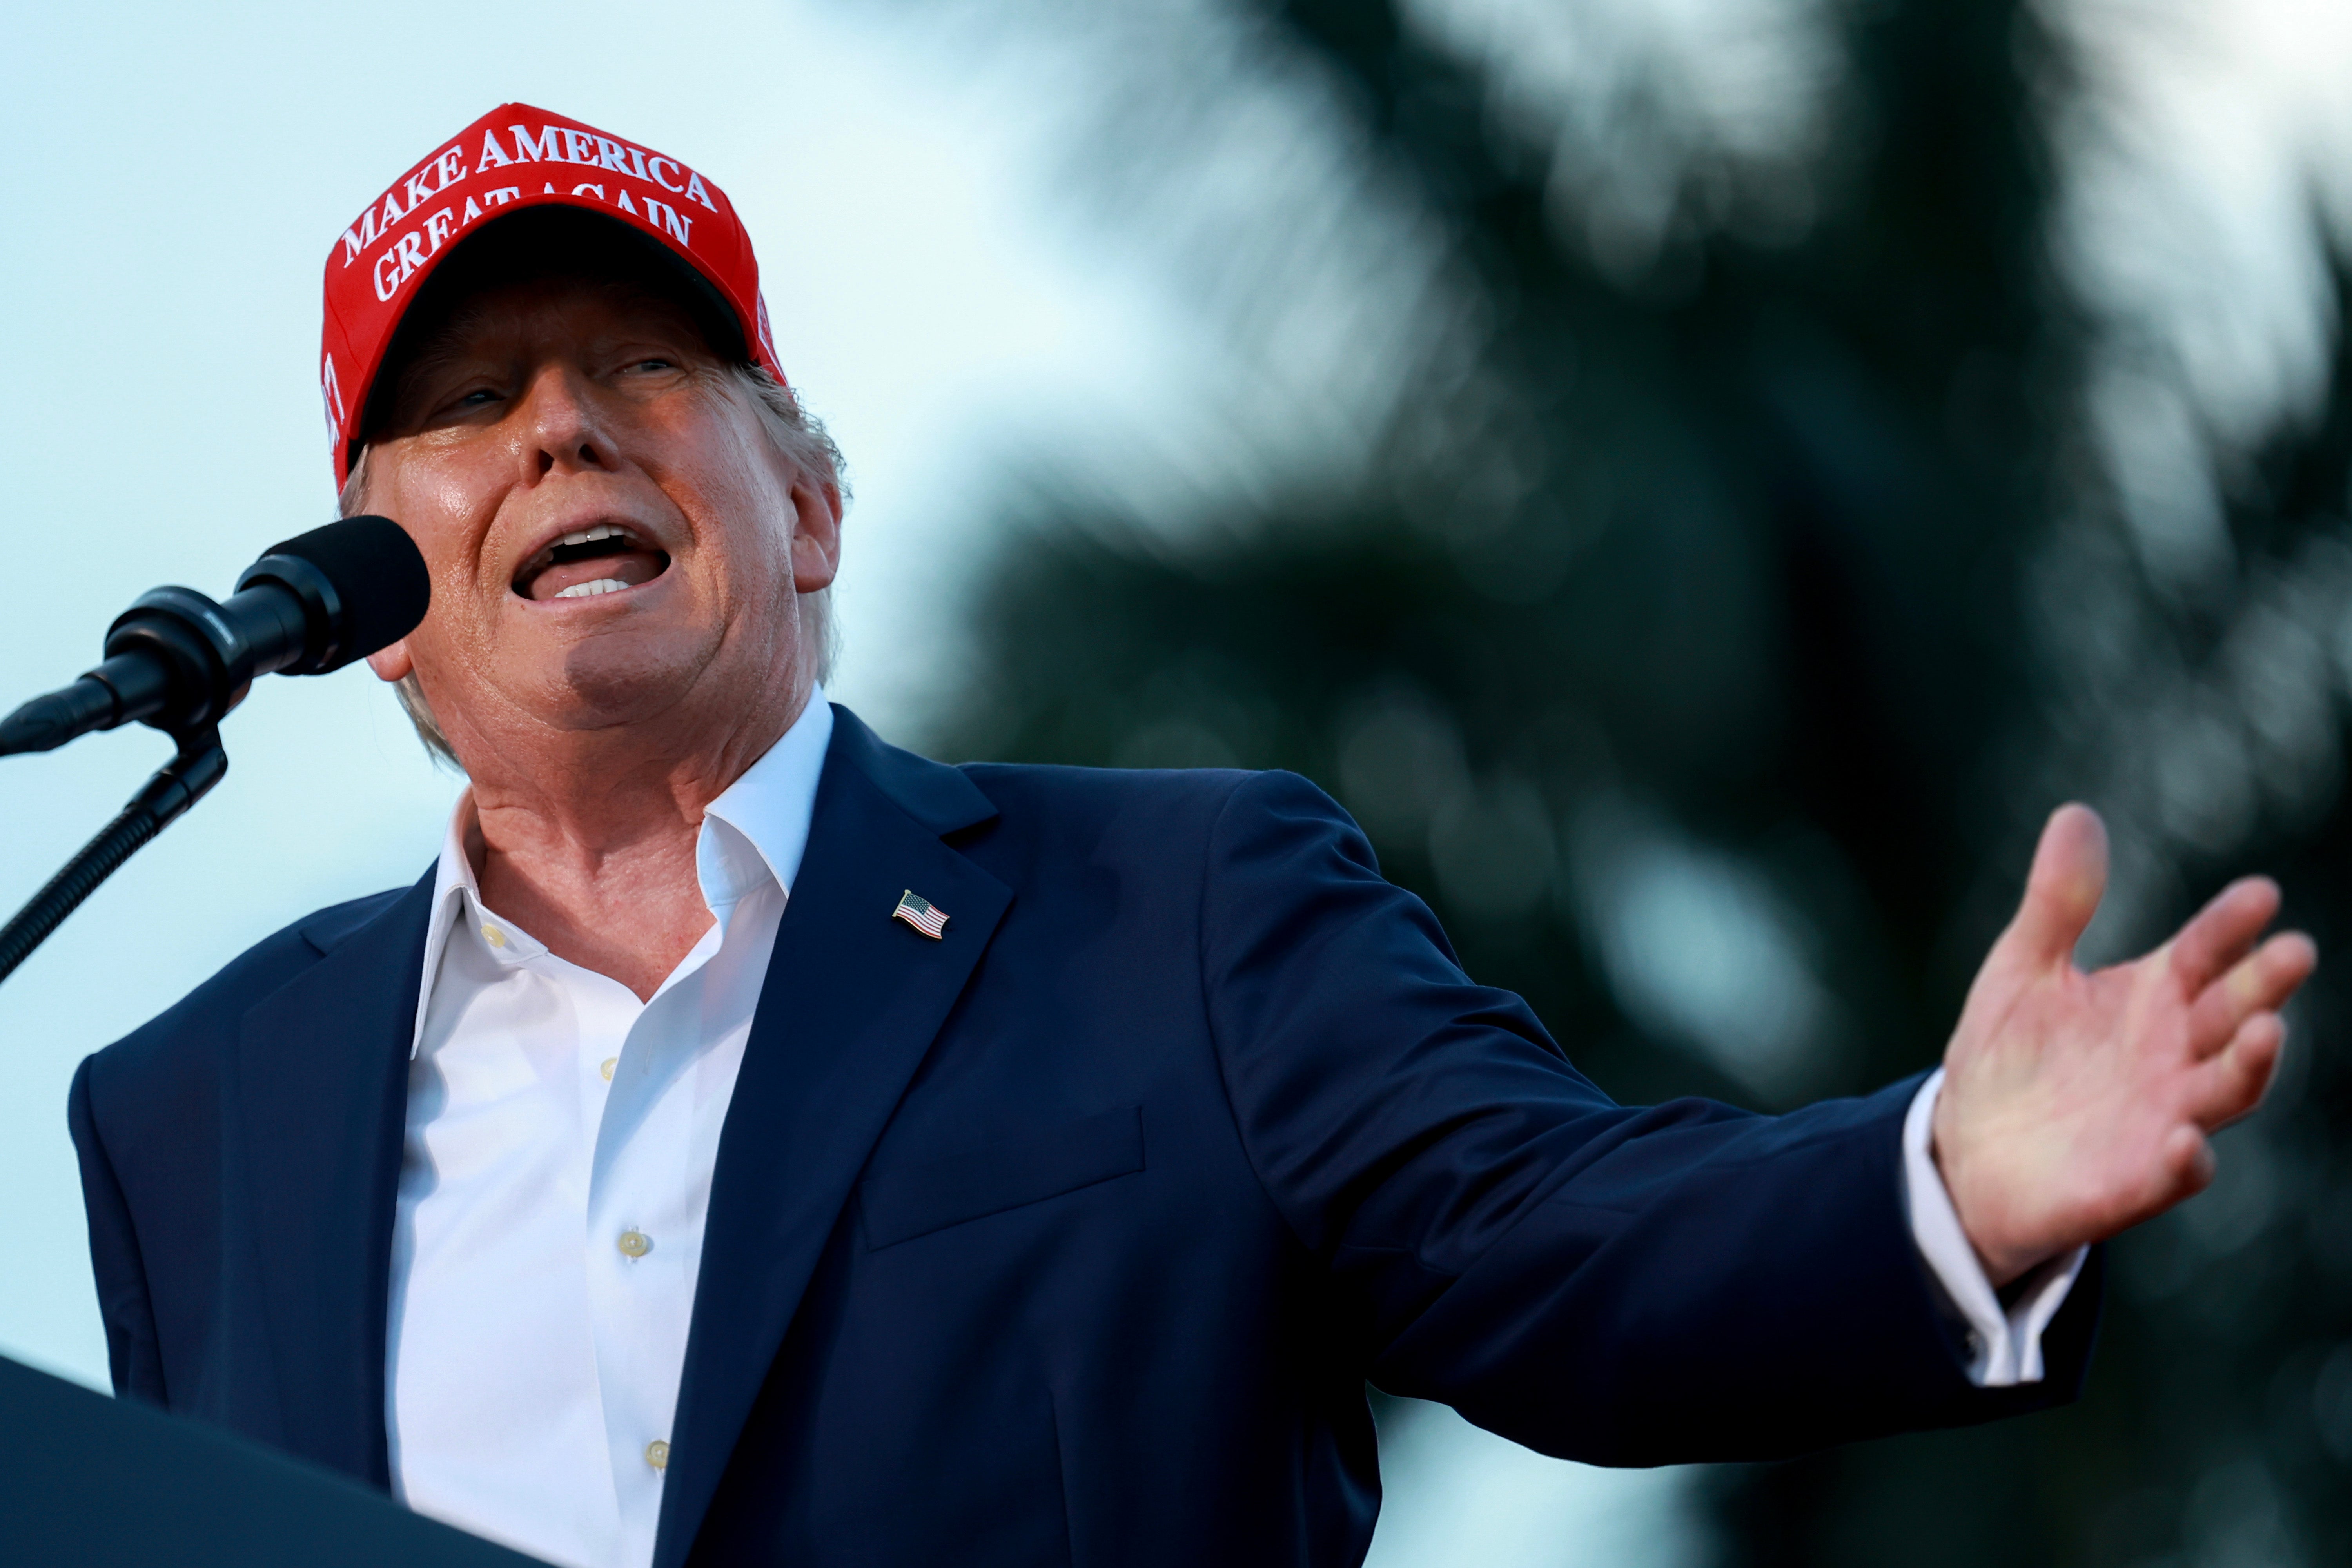 Former President Donald Trump speaks during his campaign rally at the Trump National Doral Golf Club on July 09, 2024 in Doral, Florida. On Friday, he slammed George Clooney for his New York Times op-ed calling on Joe Biden to step aside